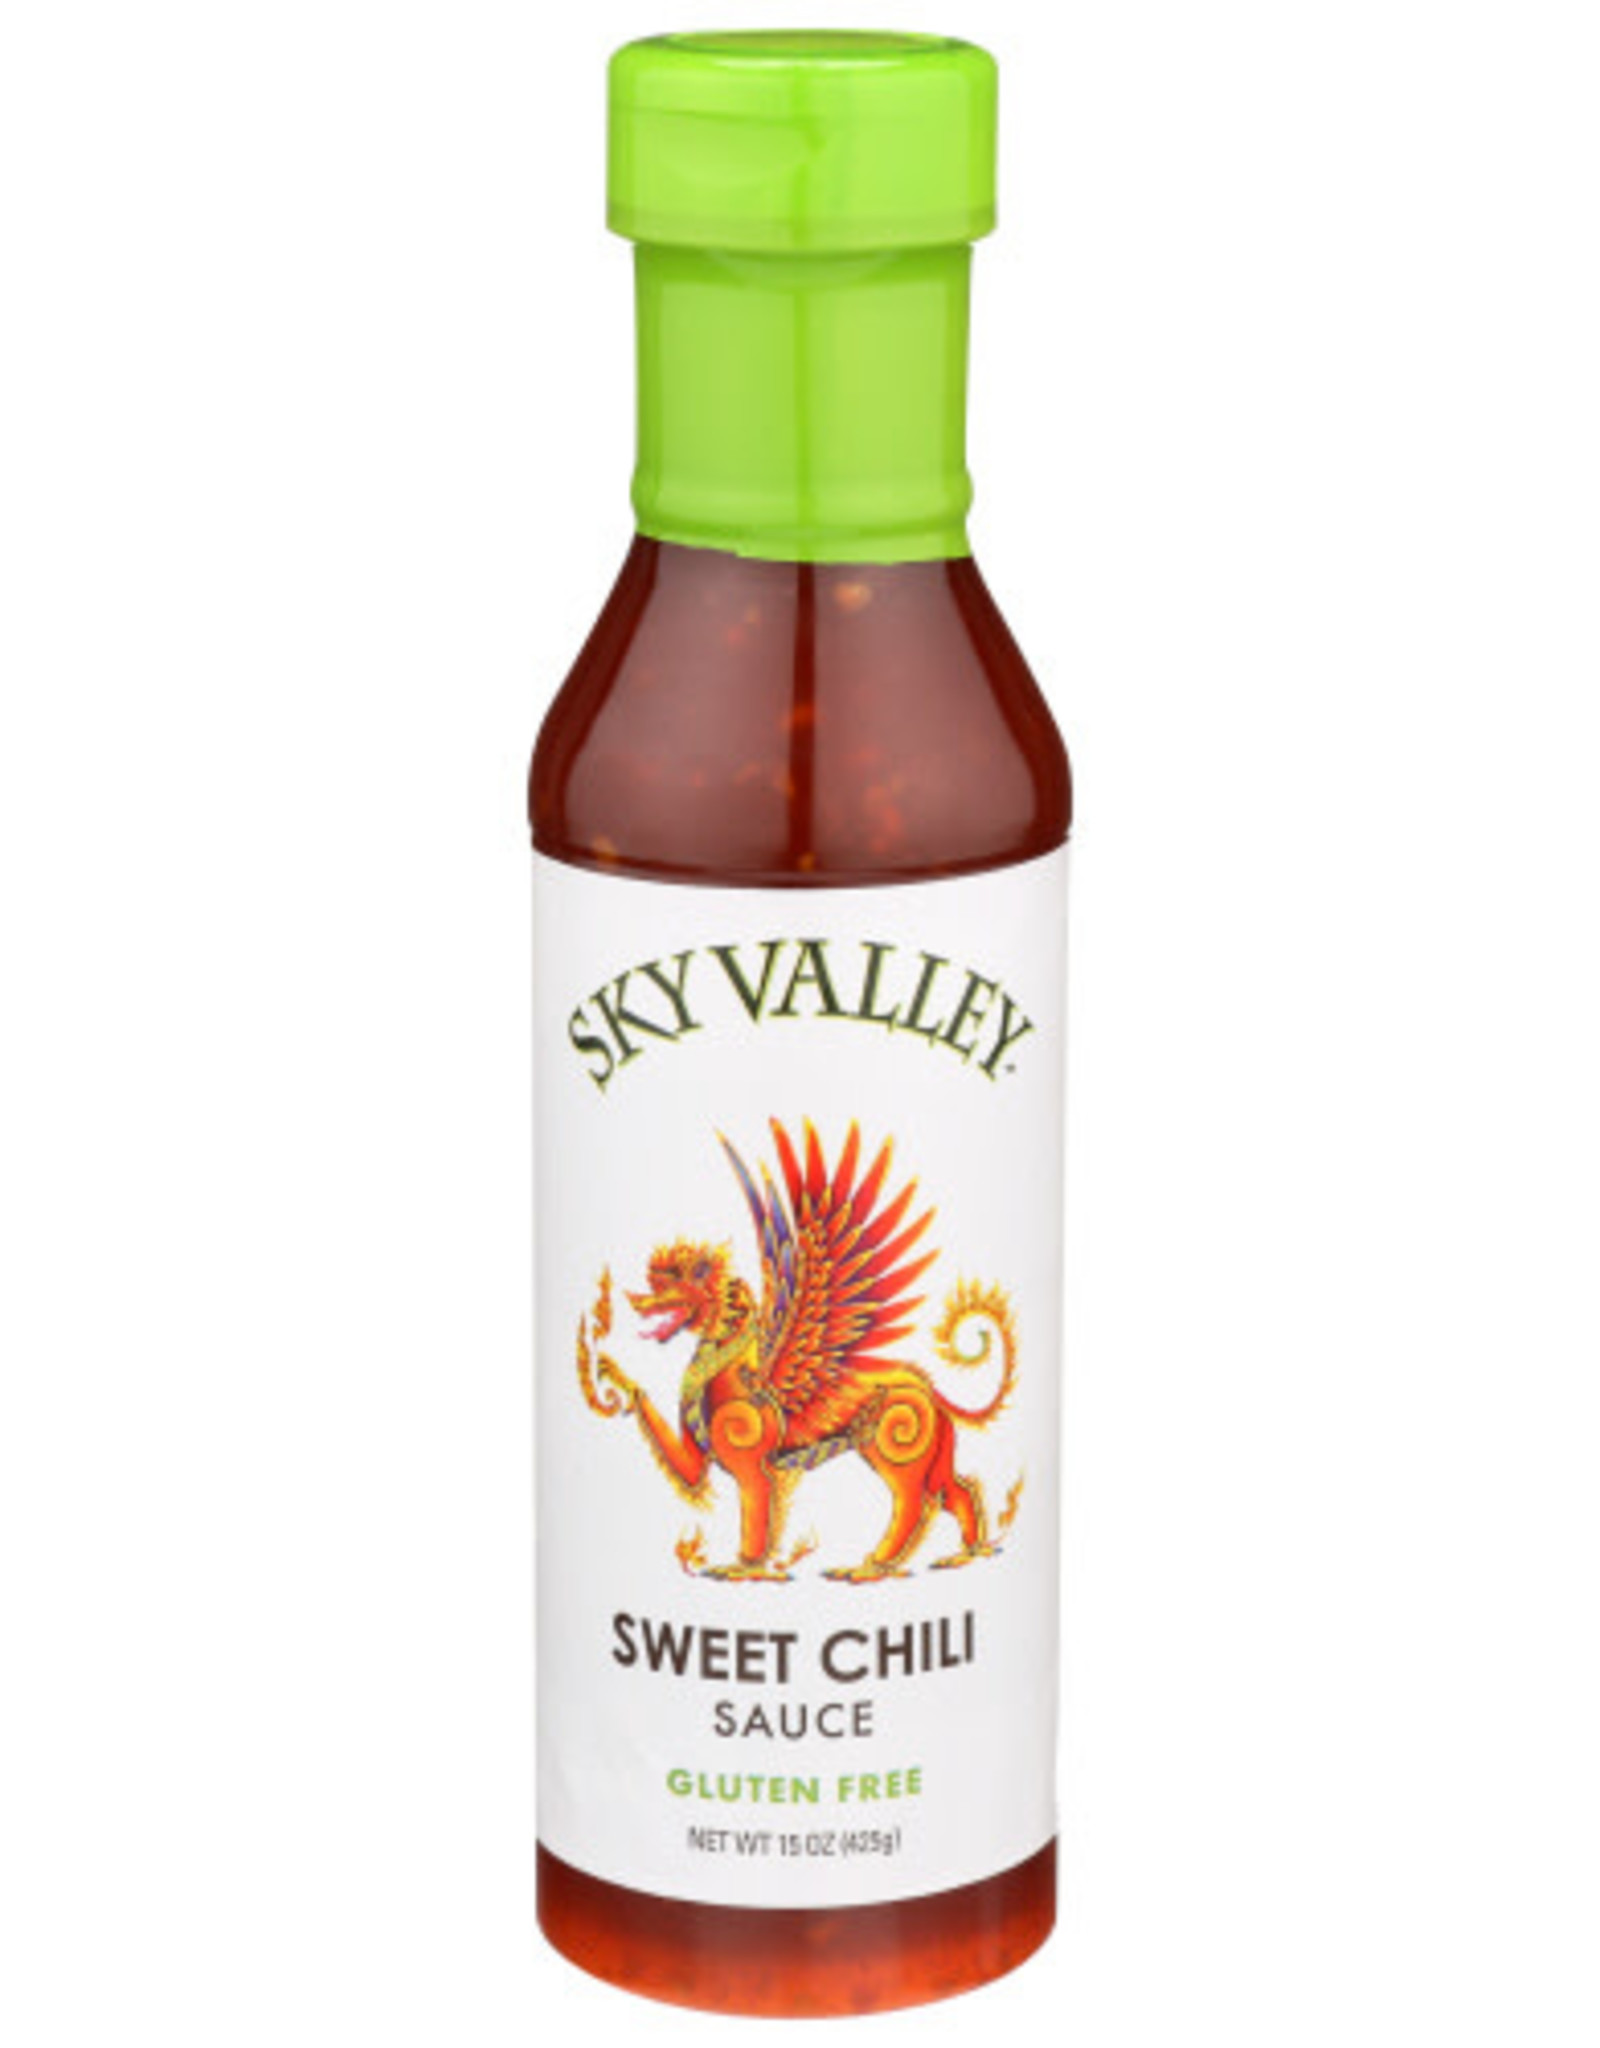 SKY VALLEY SKY VALLEY SWEET CHILI SAUCE, 15 OZ.